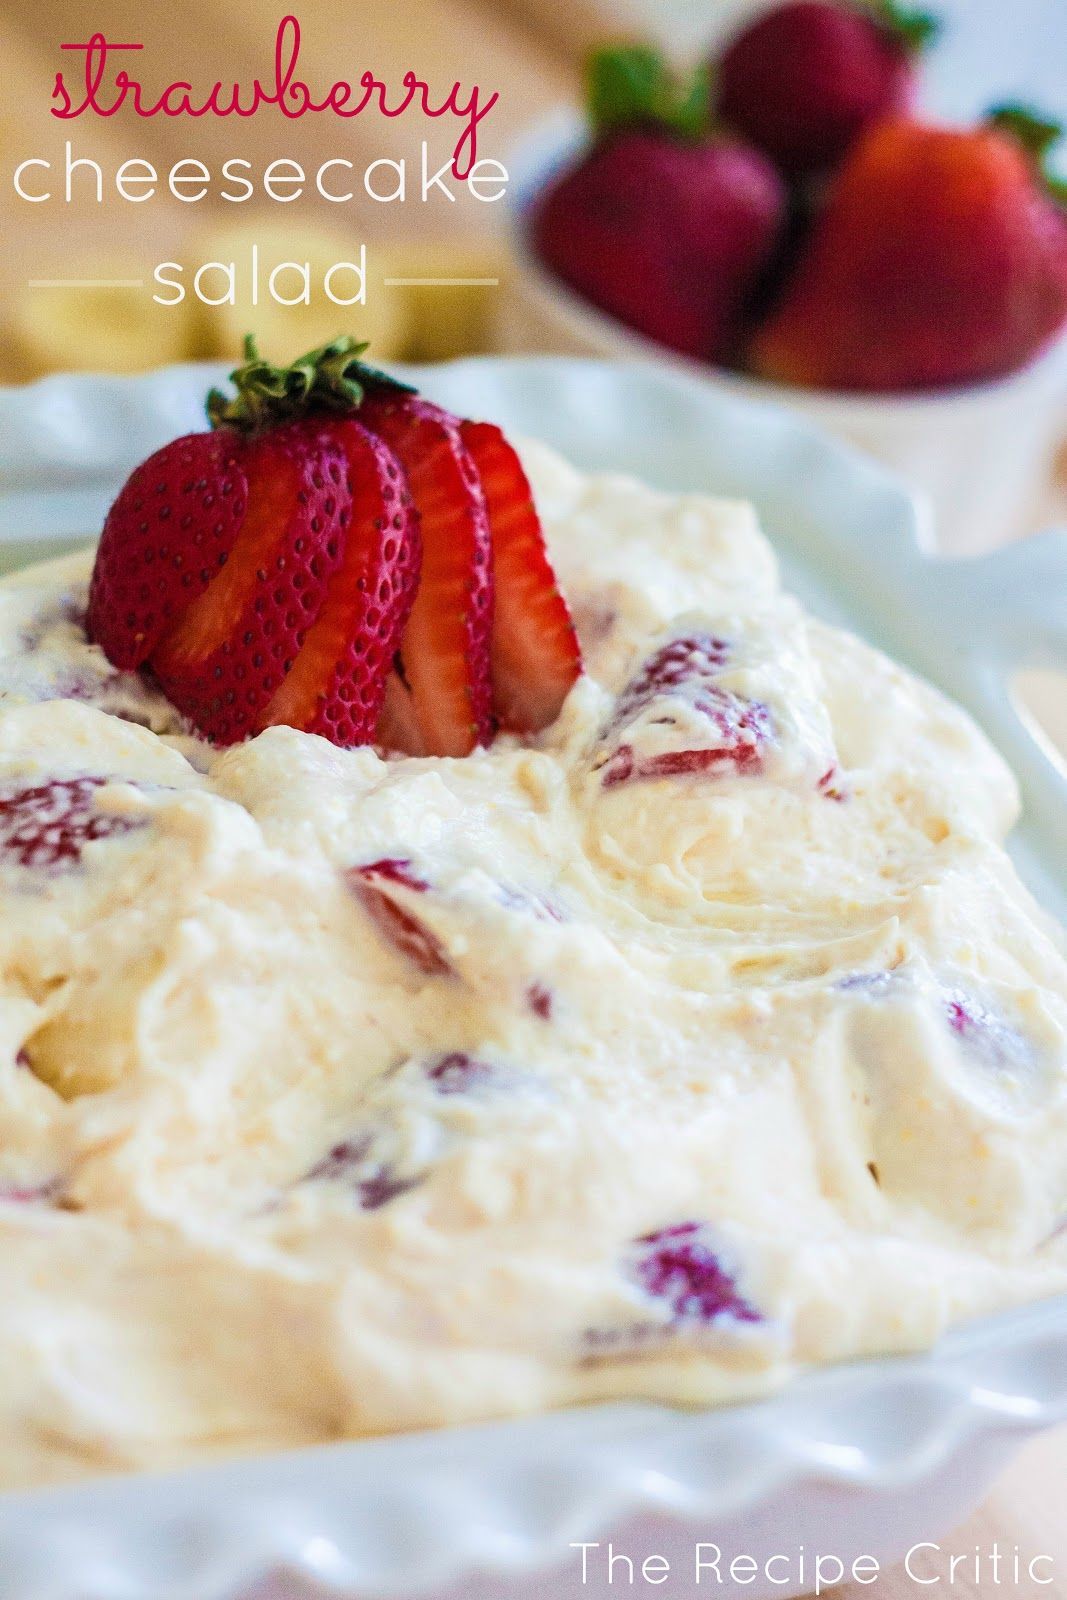 Strawberry Cheesecake Salad – The BEST salad to bring to any potluck!